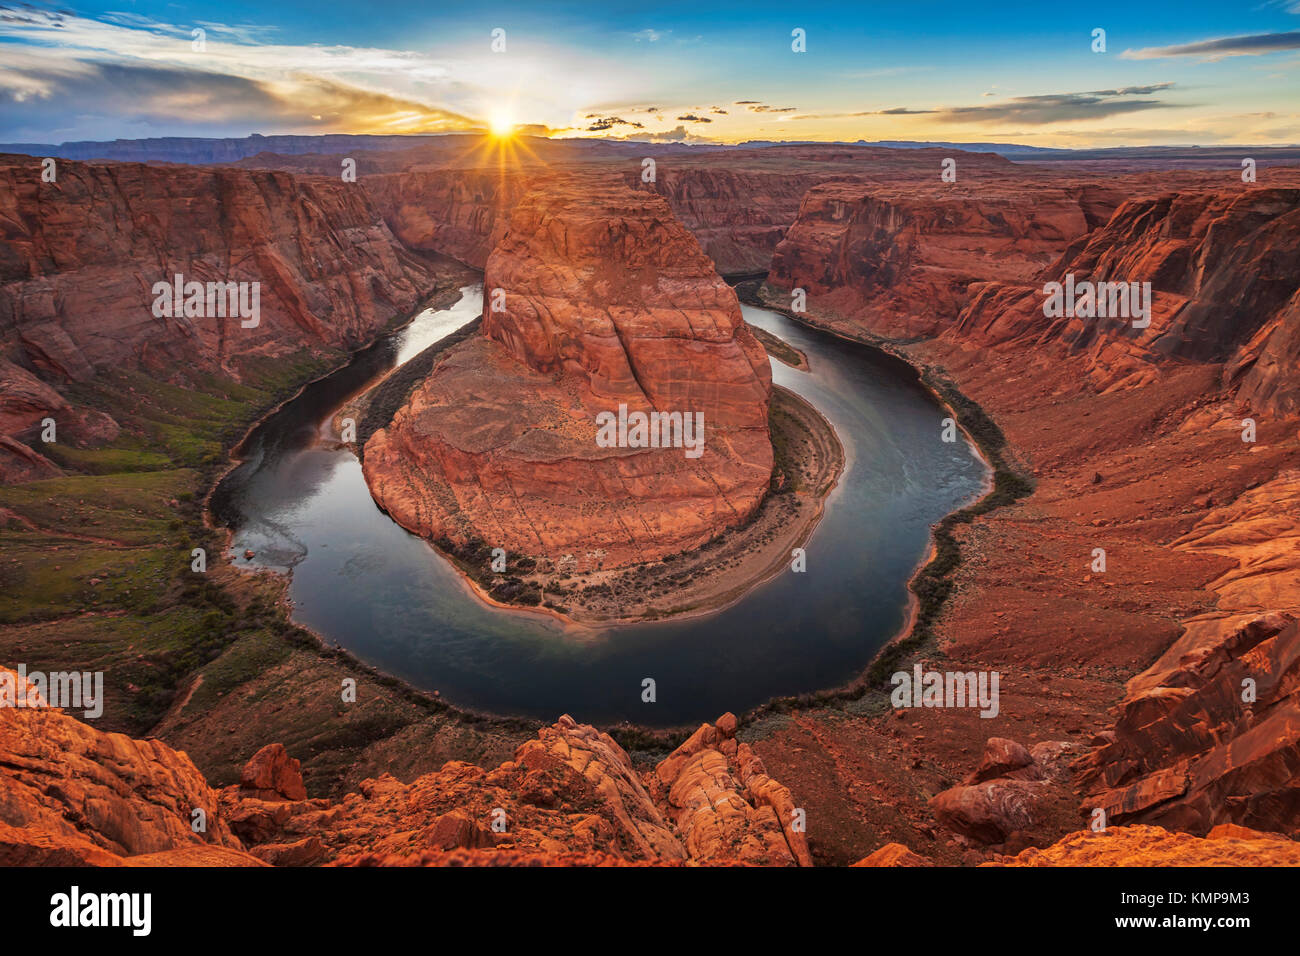 Horseshoe Bend, a meander of the Colorado River in the Glen Canyon area of Arizona, at sunset. Stock Photo